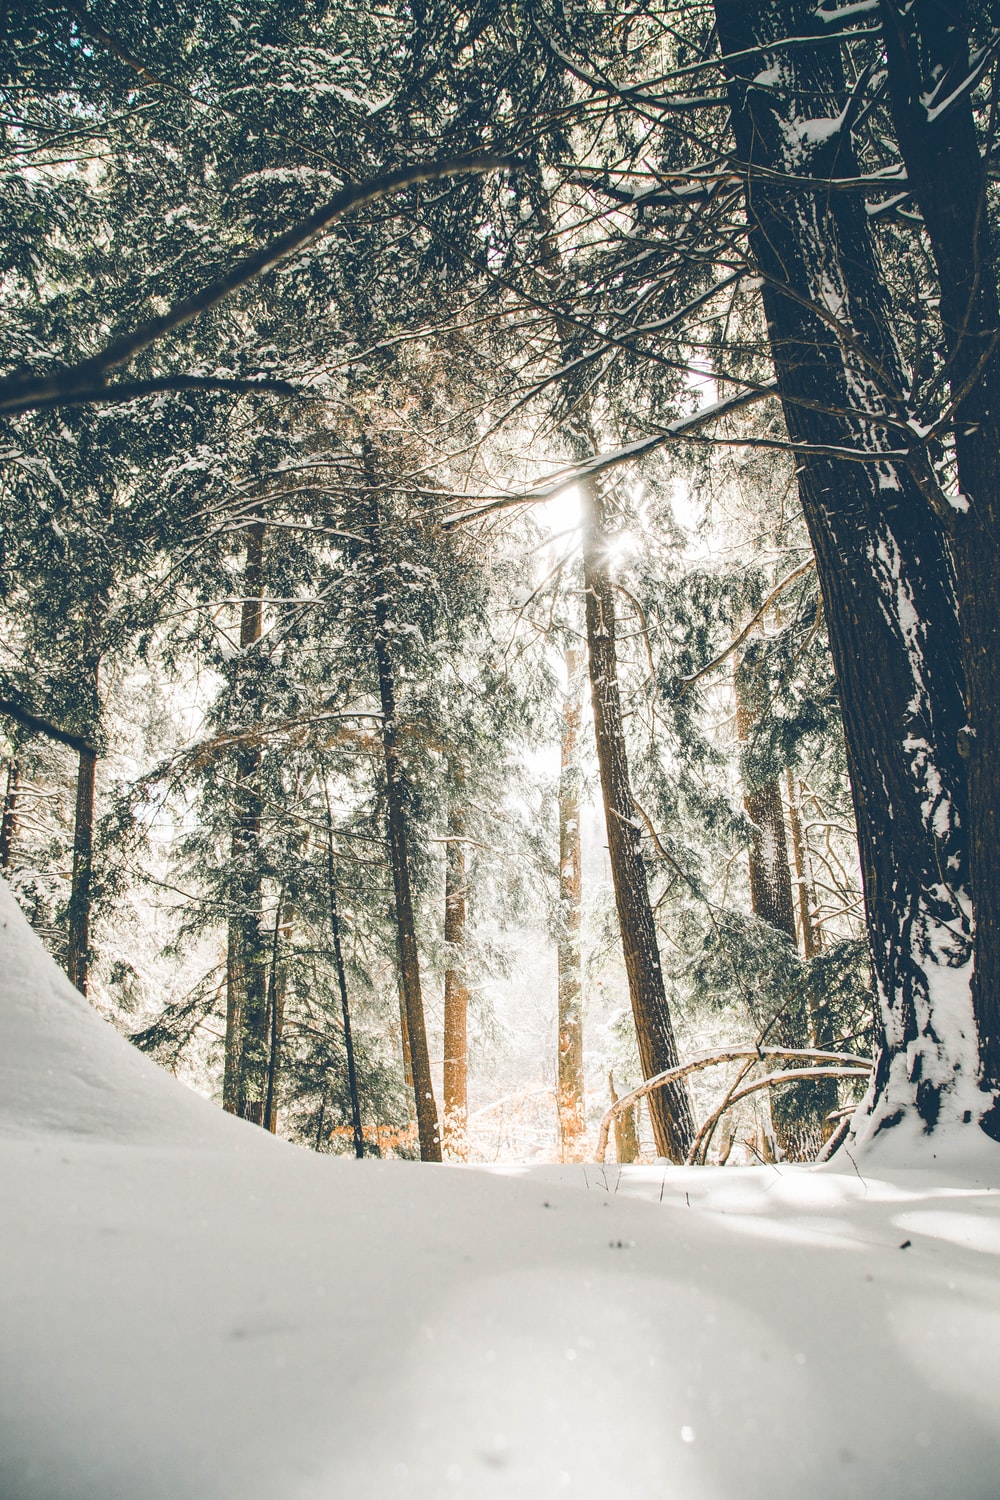 Snow Forest Picture. Download Free Image